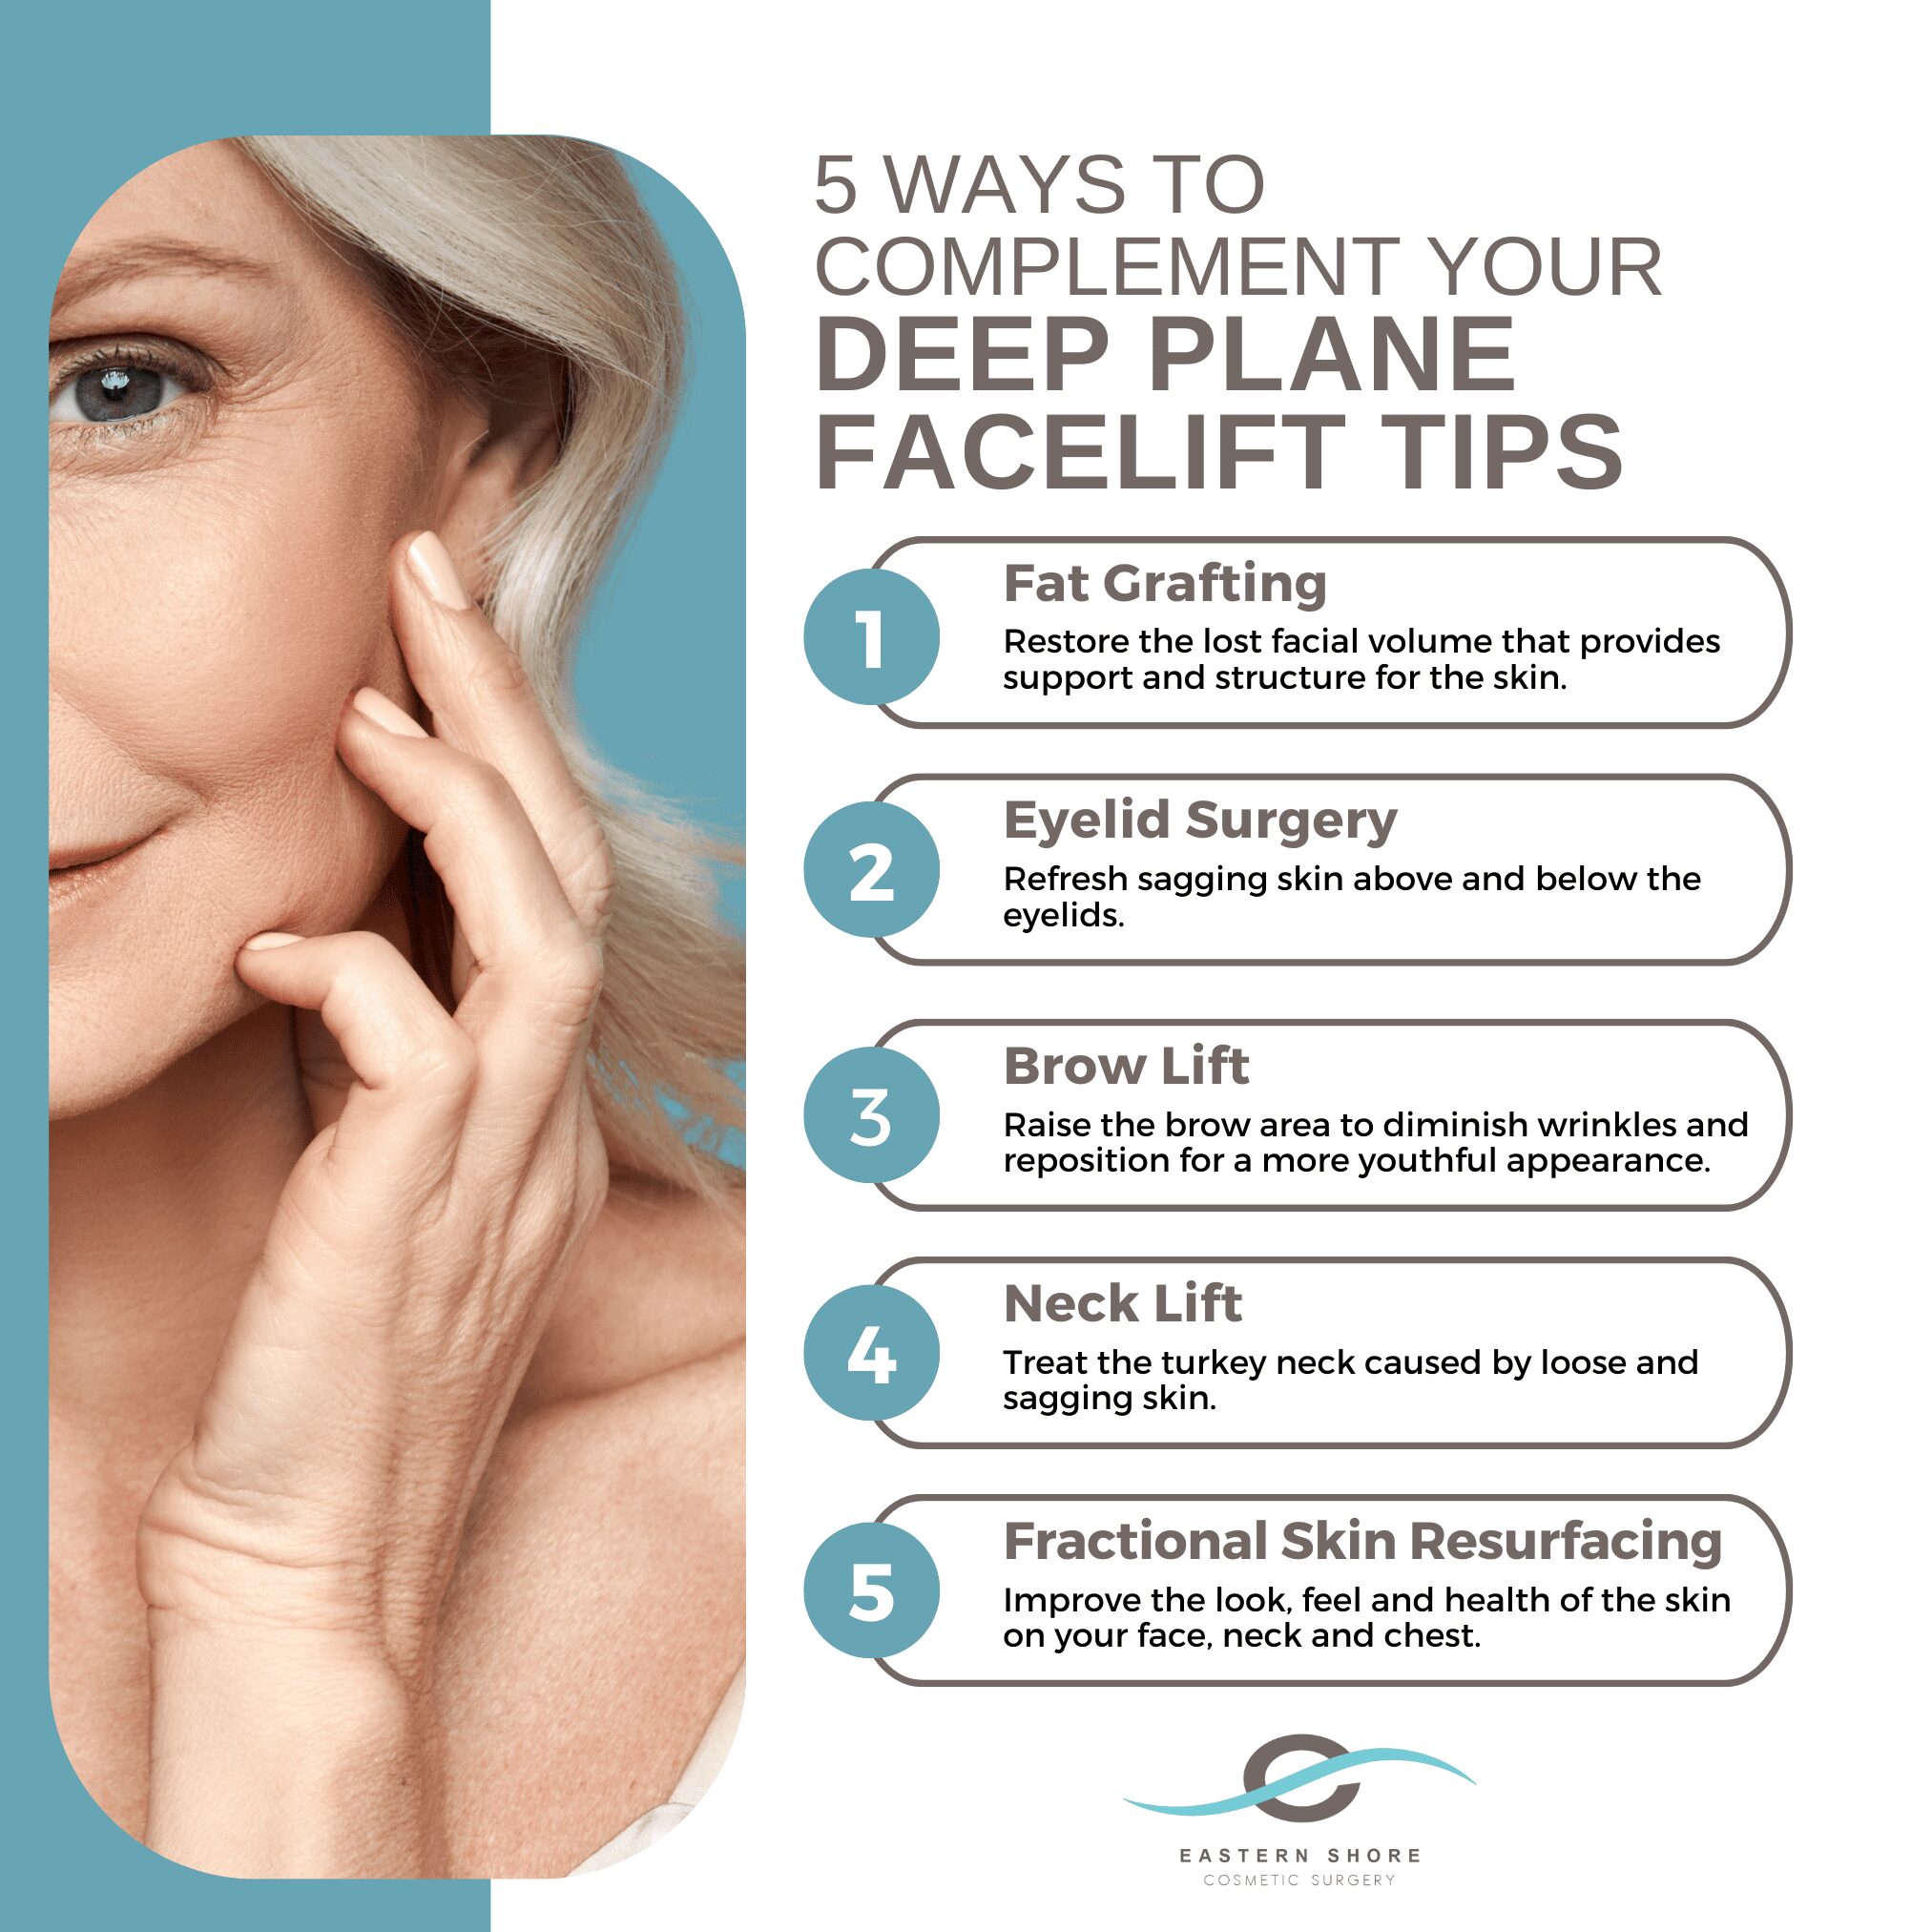 5 Ways to Complement Your Deep Plane Facelift